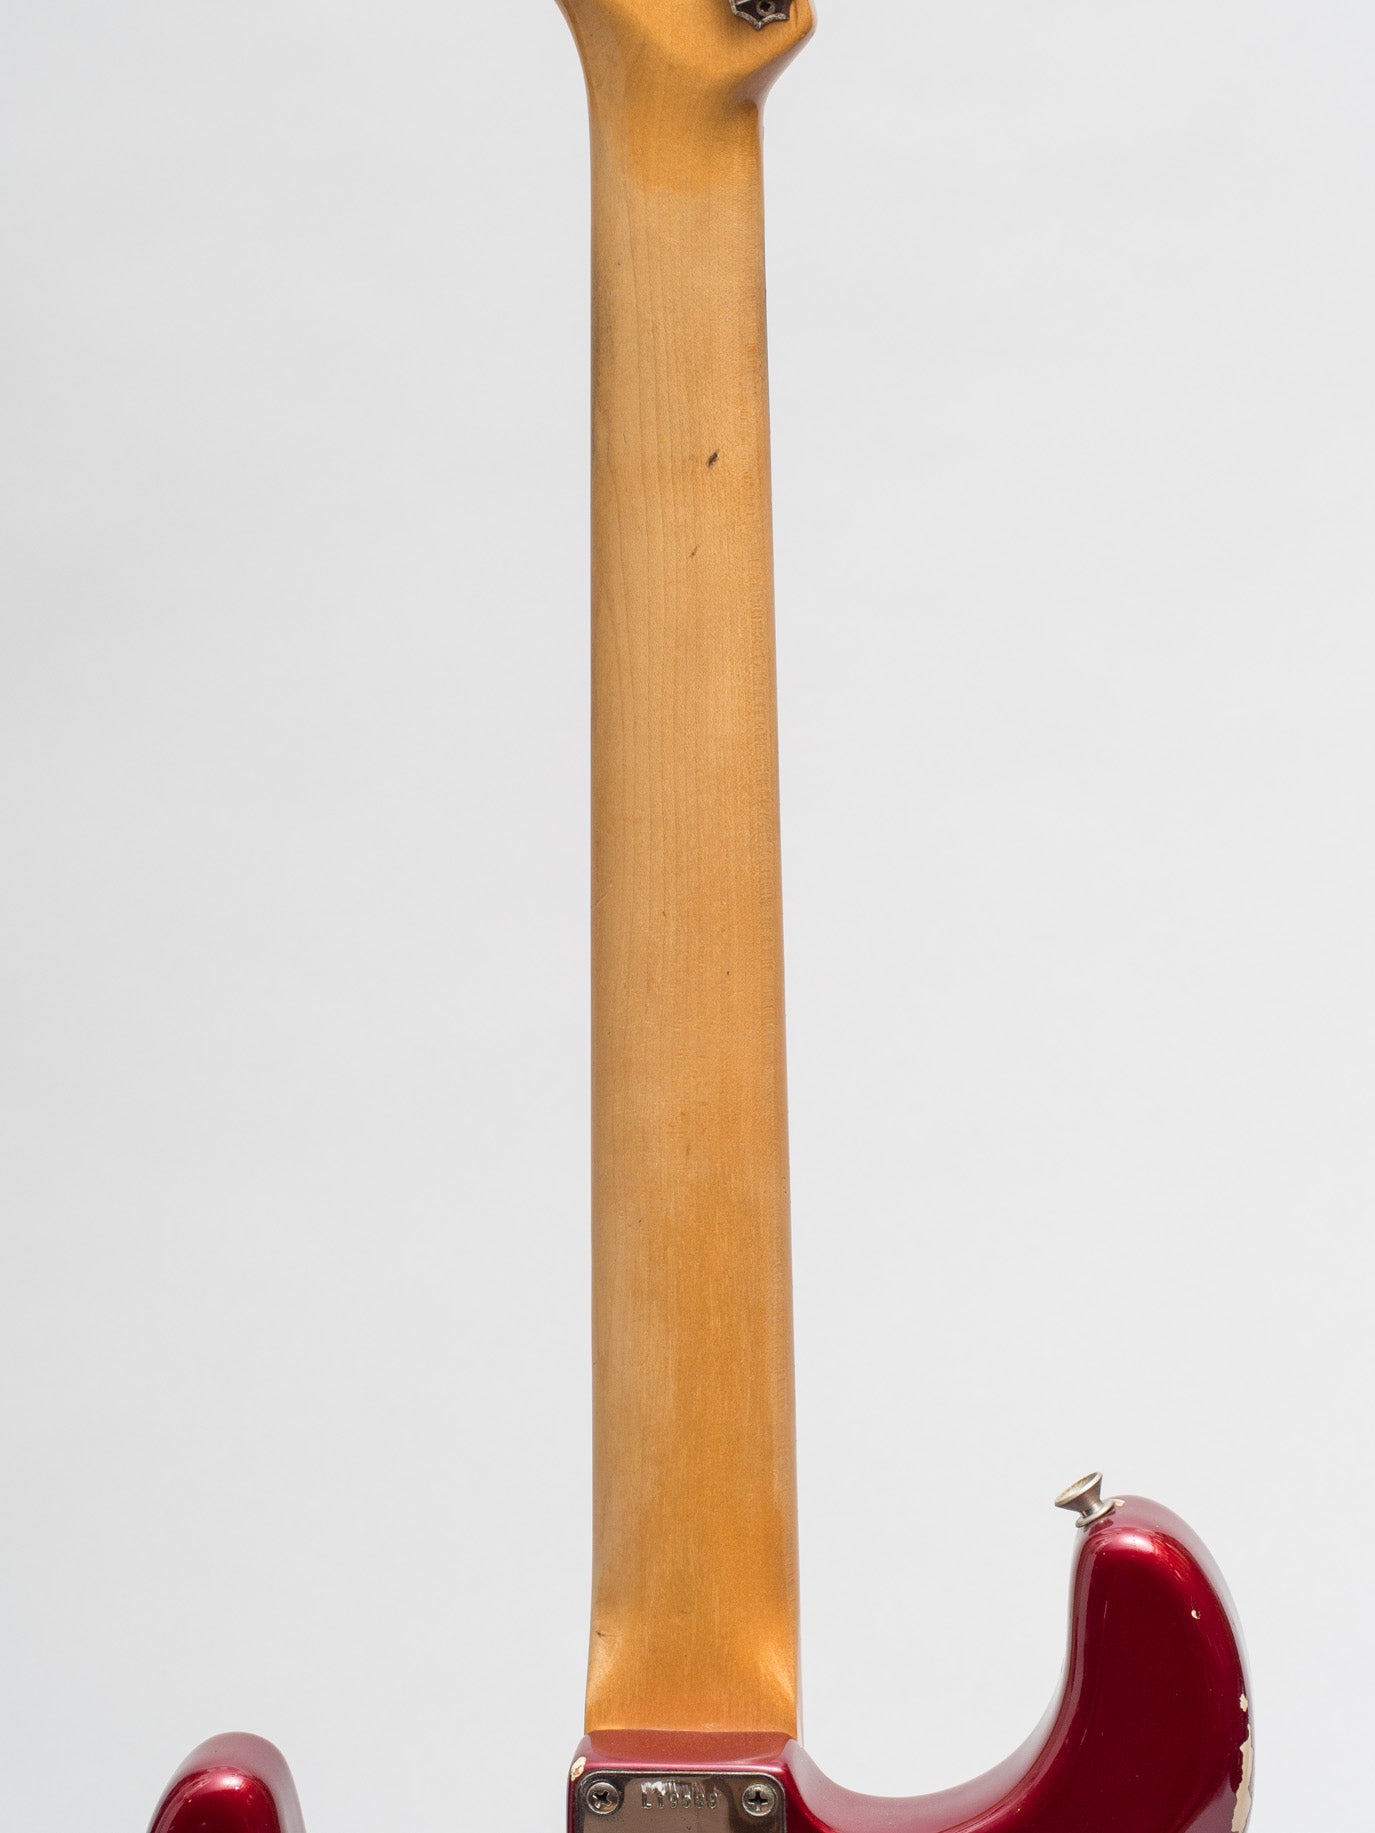 1963 Fender Stratocaster Candy Apple Red